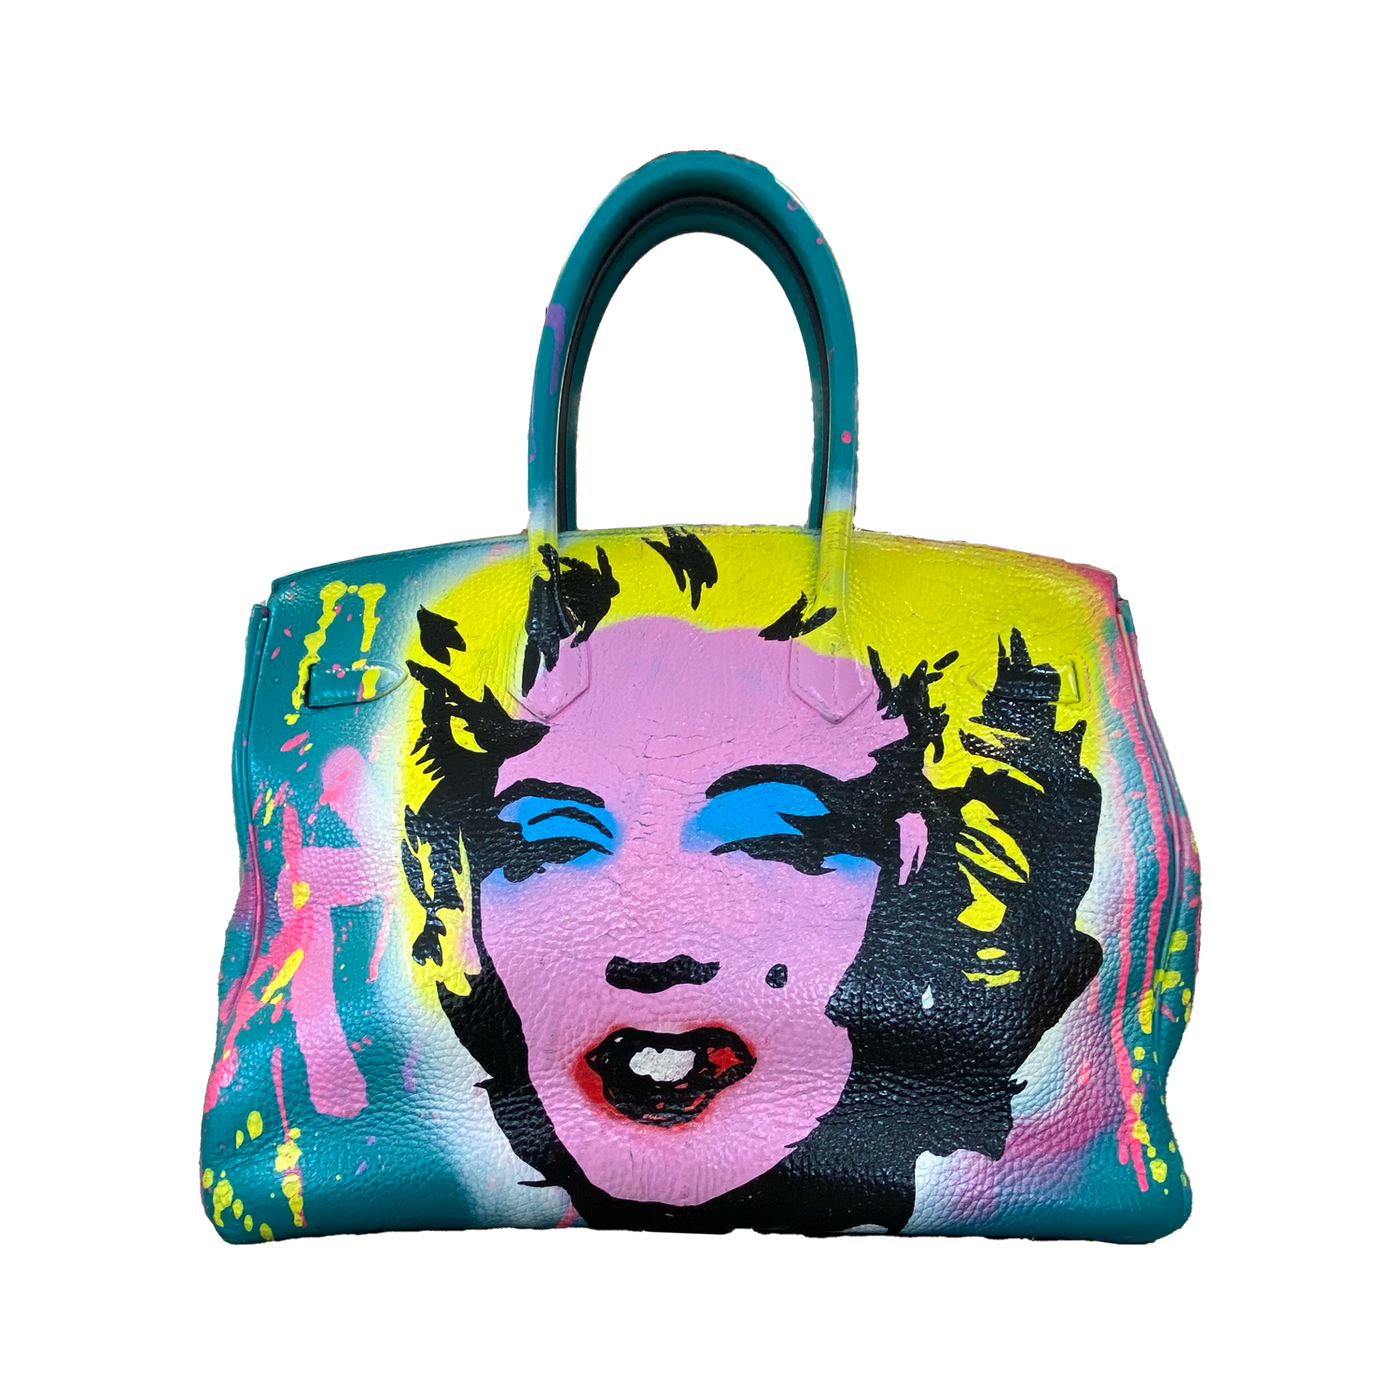 What do you think about this custom @Alec Monopoly #Birkin by #Hermes